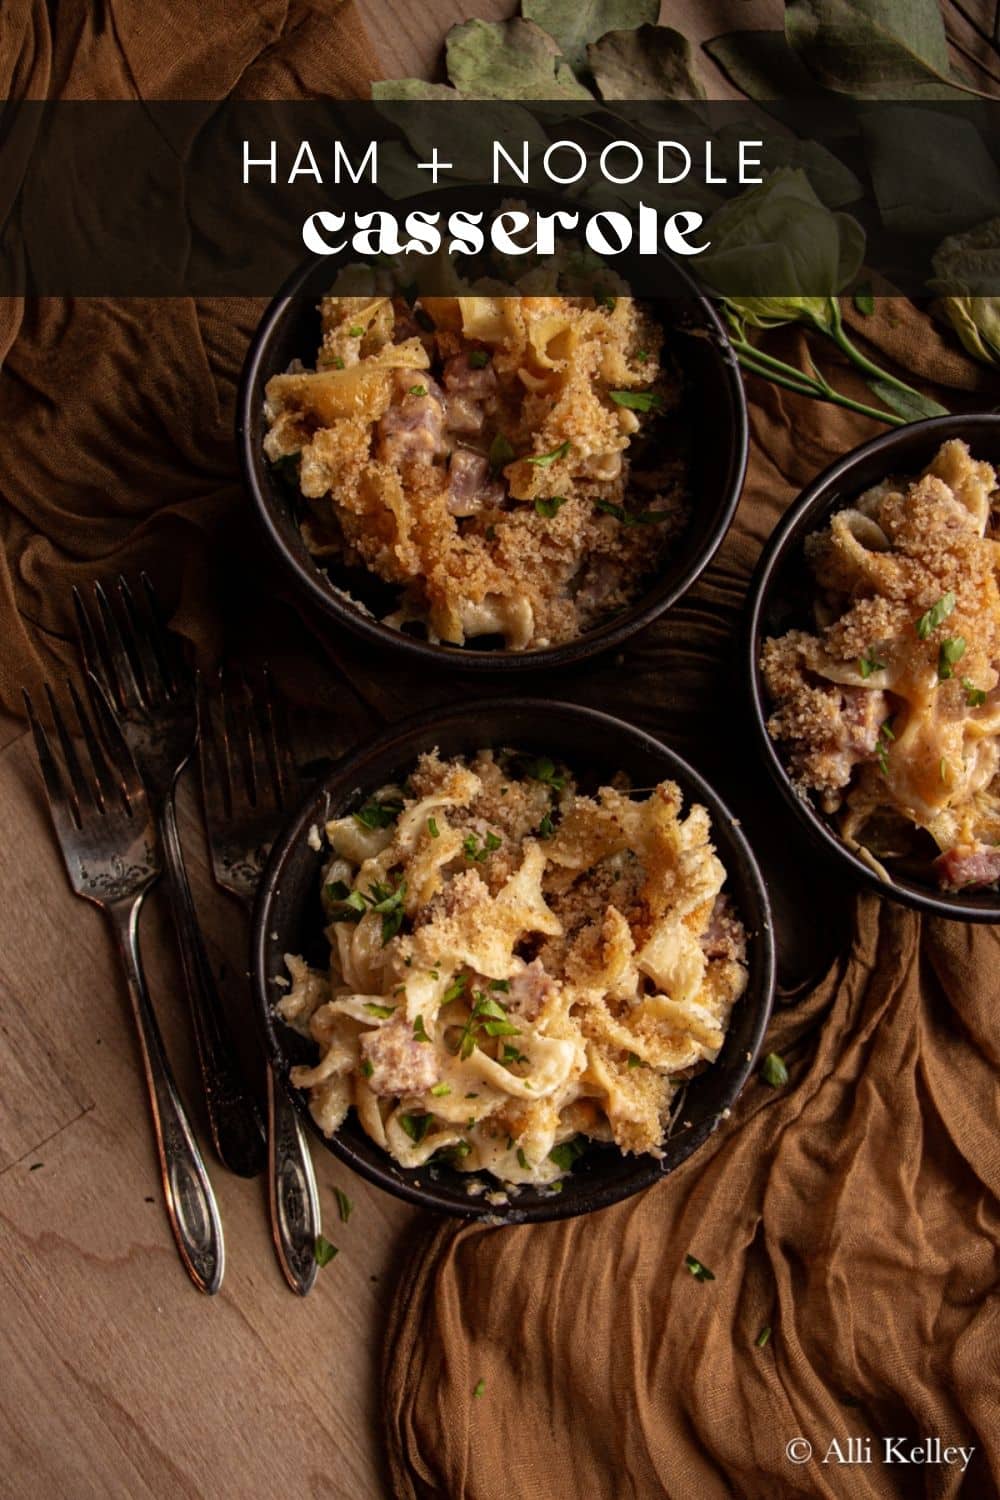 If you have some spare holiday ham or cooked ham steaks - leftover ham casserole is the perfect option for using it up! This easy recipe is a great way to add flavor and texture to your meal while ensuring nothing goes to waste. Not only that, but this delicious dish makes the best easy lunch or comforting midweek dinner.